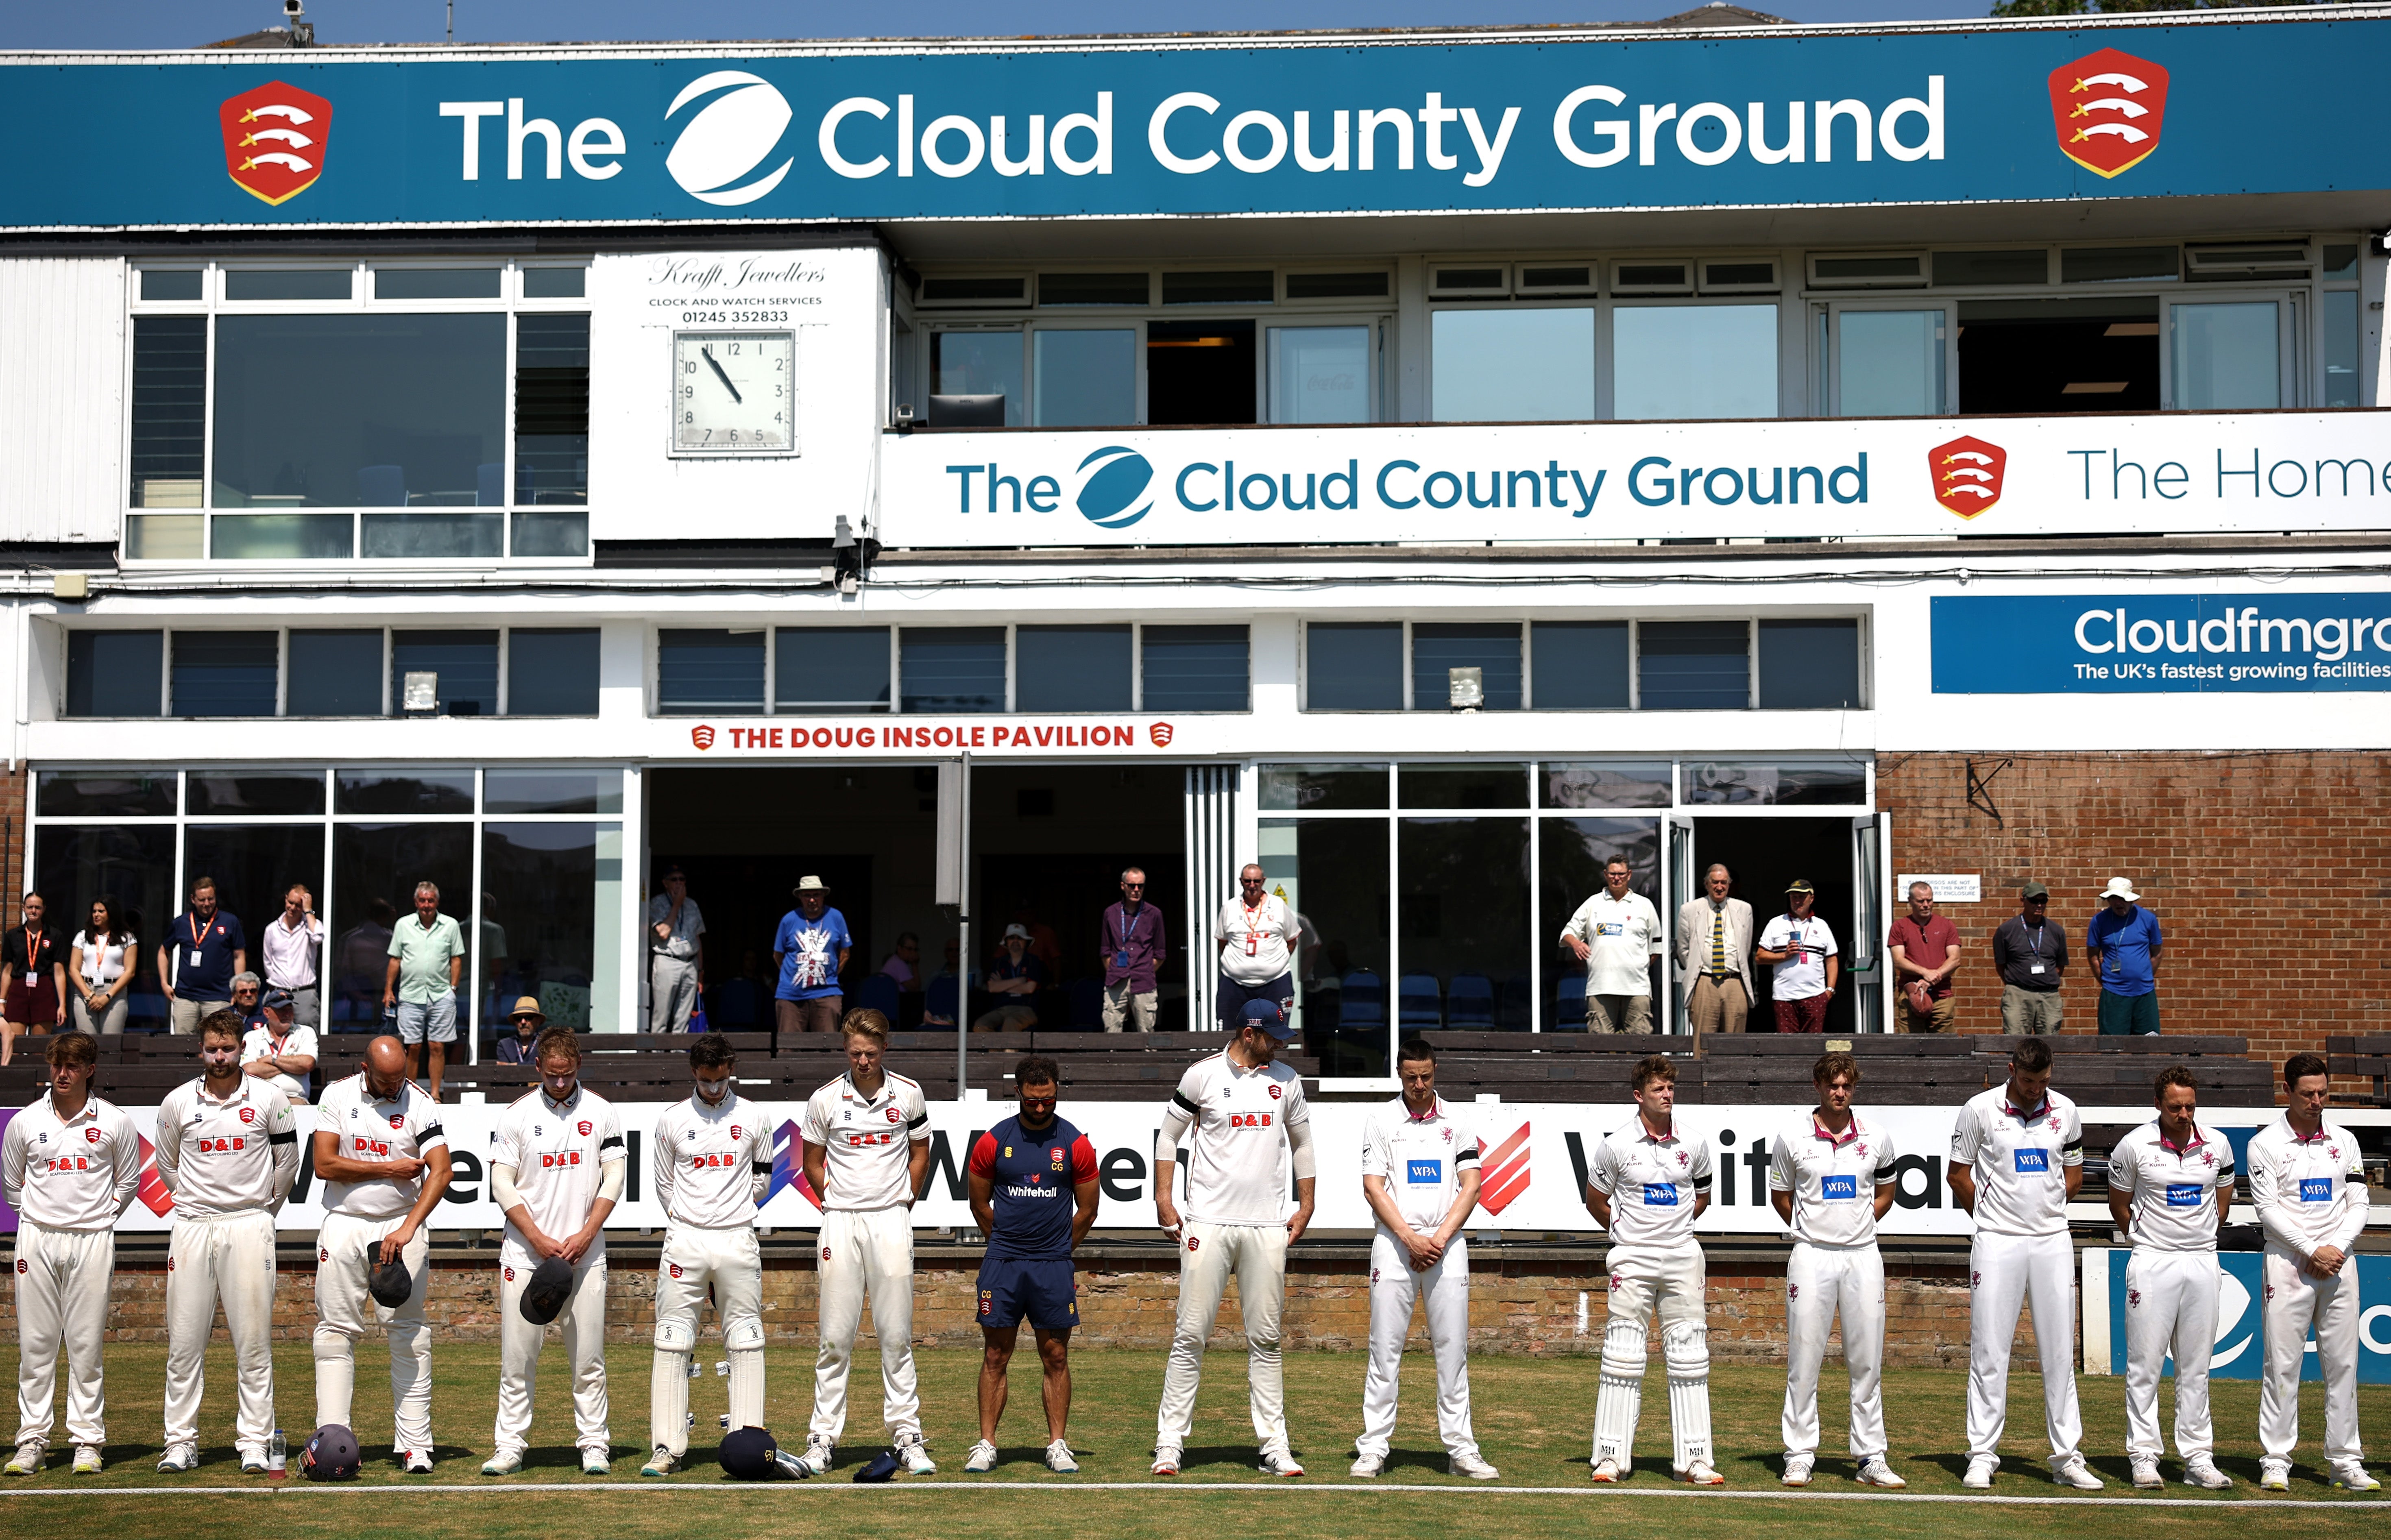 A minute’s silence his held in remembrance of the victims of the Nottingham attacks prior to the LV= Insurance County Championship Division 1 match between Essex and Somerset at Cloud County Ground